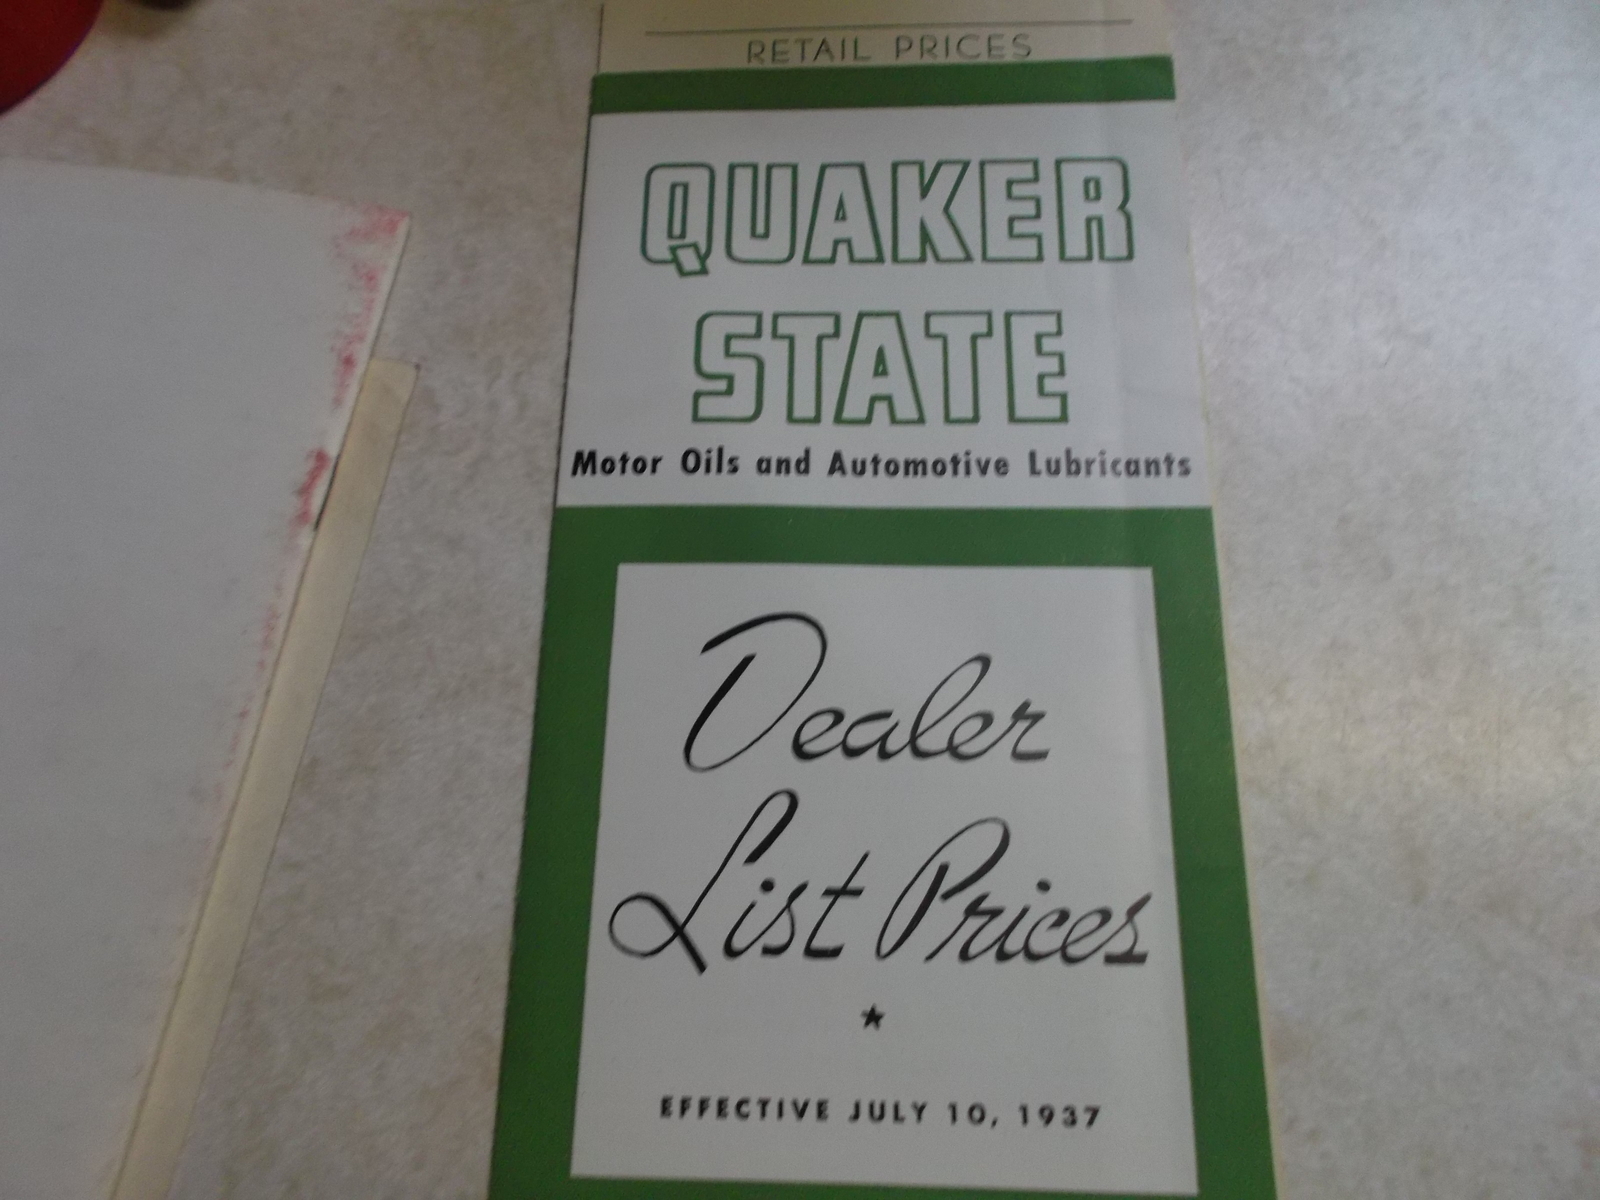 1937 Quaker State Oil & Lub Dealer List Prices Brochure & Distributor Contract - $12.00